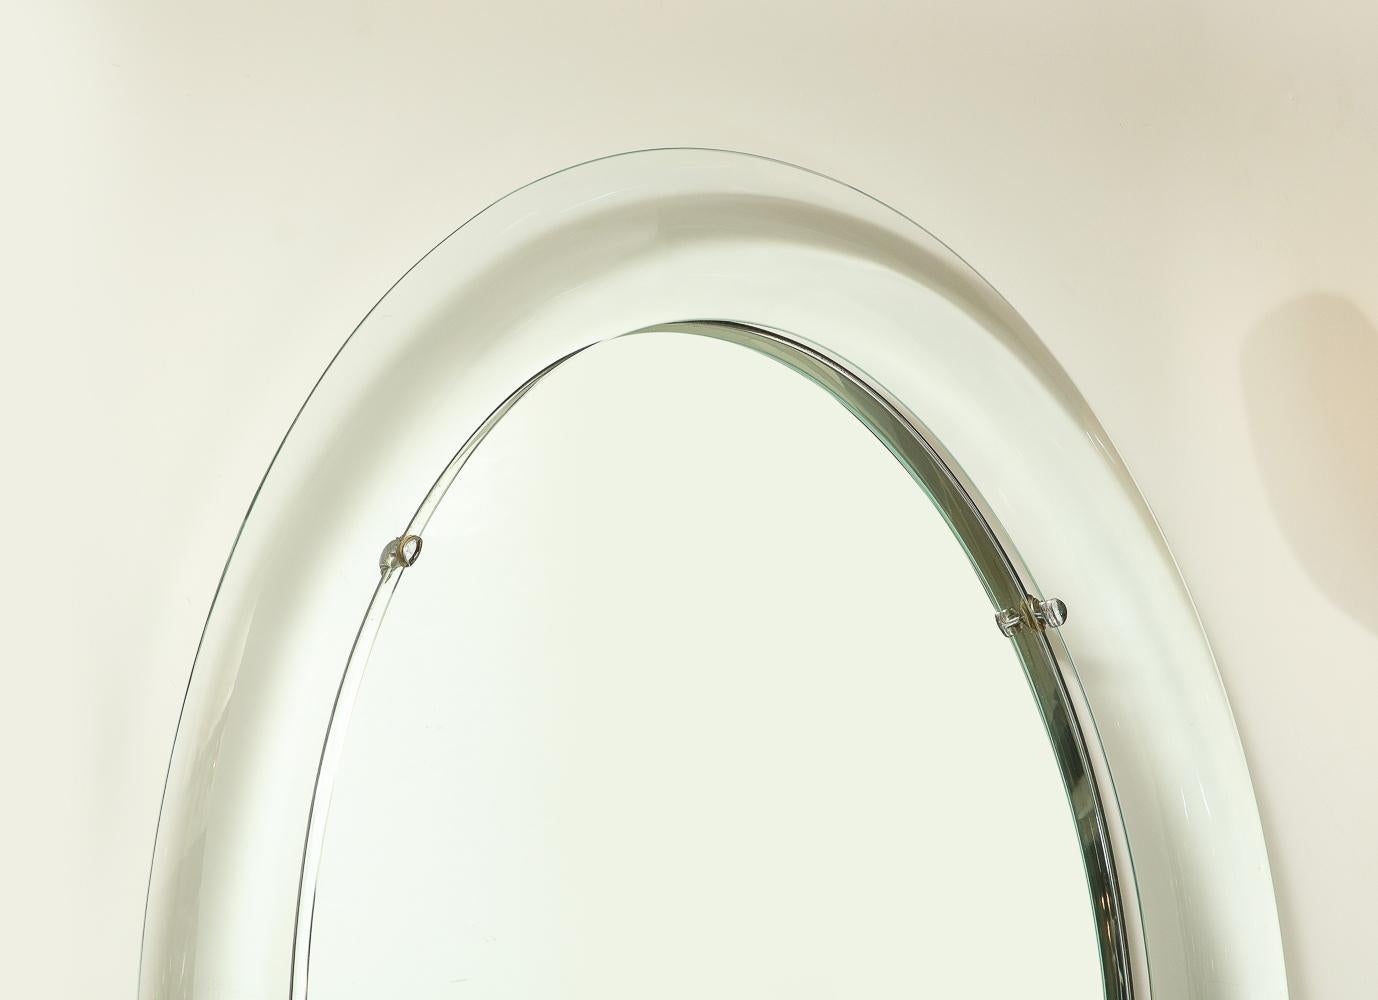 Oval Mirror by Max Ingrand for Fontana Arte. Beveled glass, mirror, nickeled brass, steel. Maker's stickers to back of mirrored glass panel. A rare model.